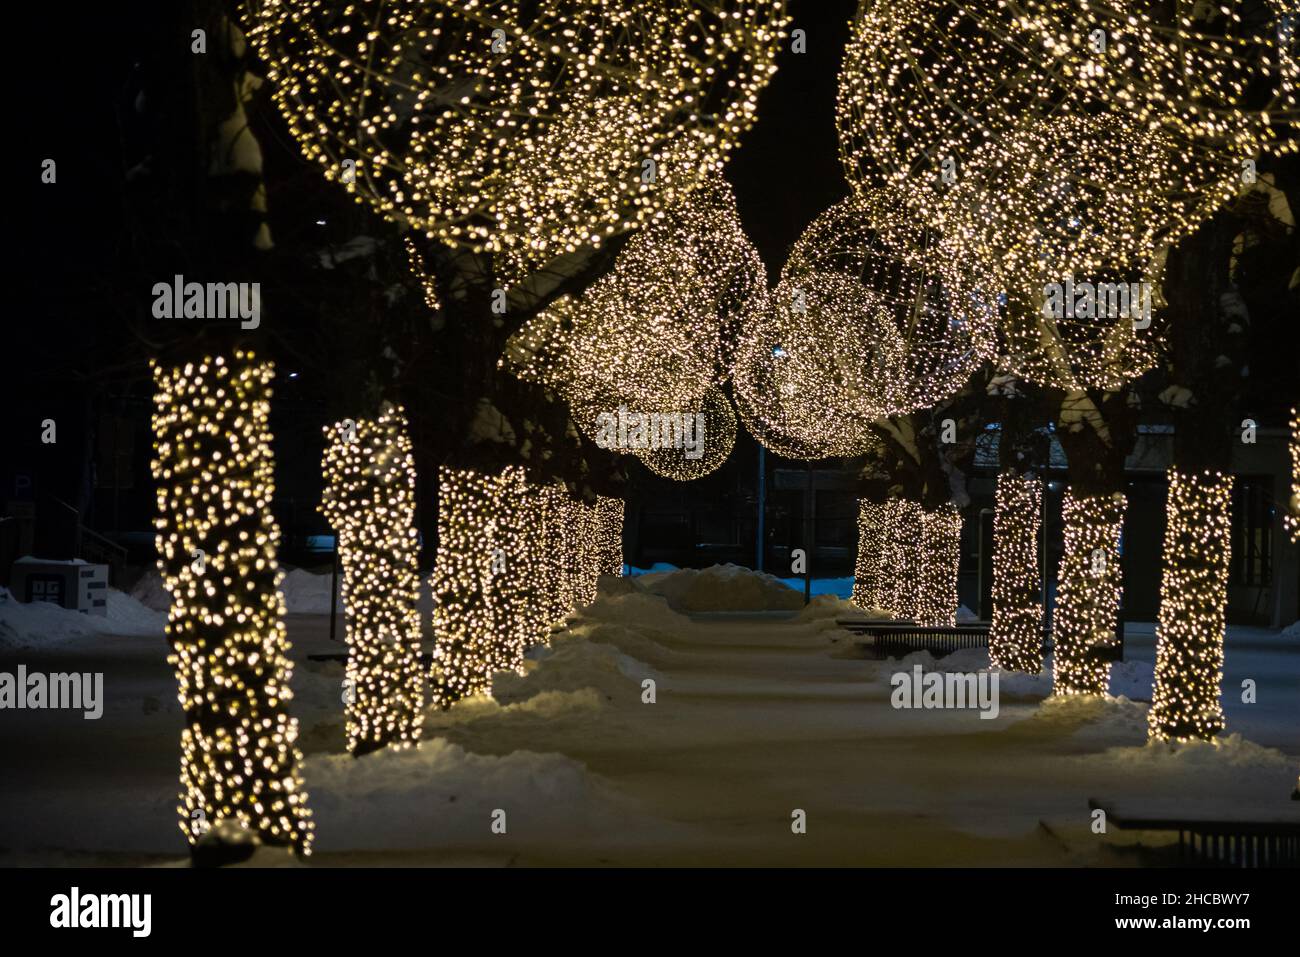 Winter night park with lanterns, pavement and trees covered with lights ...